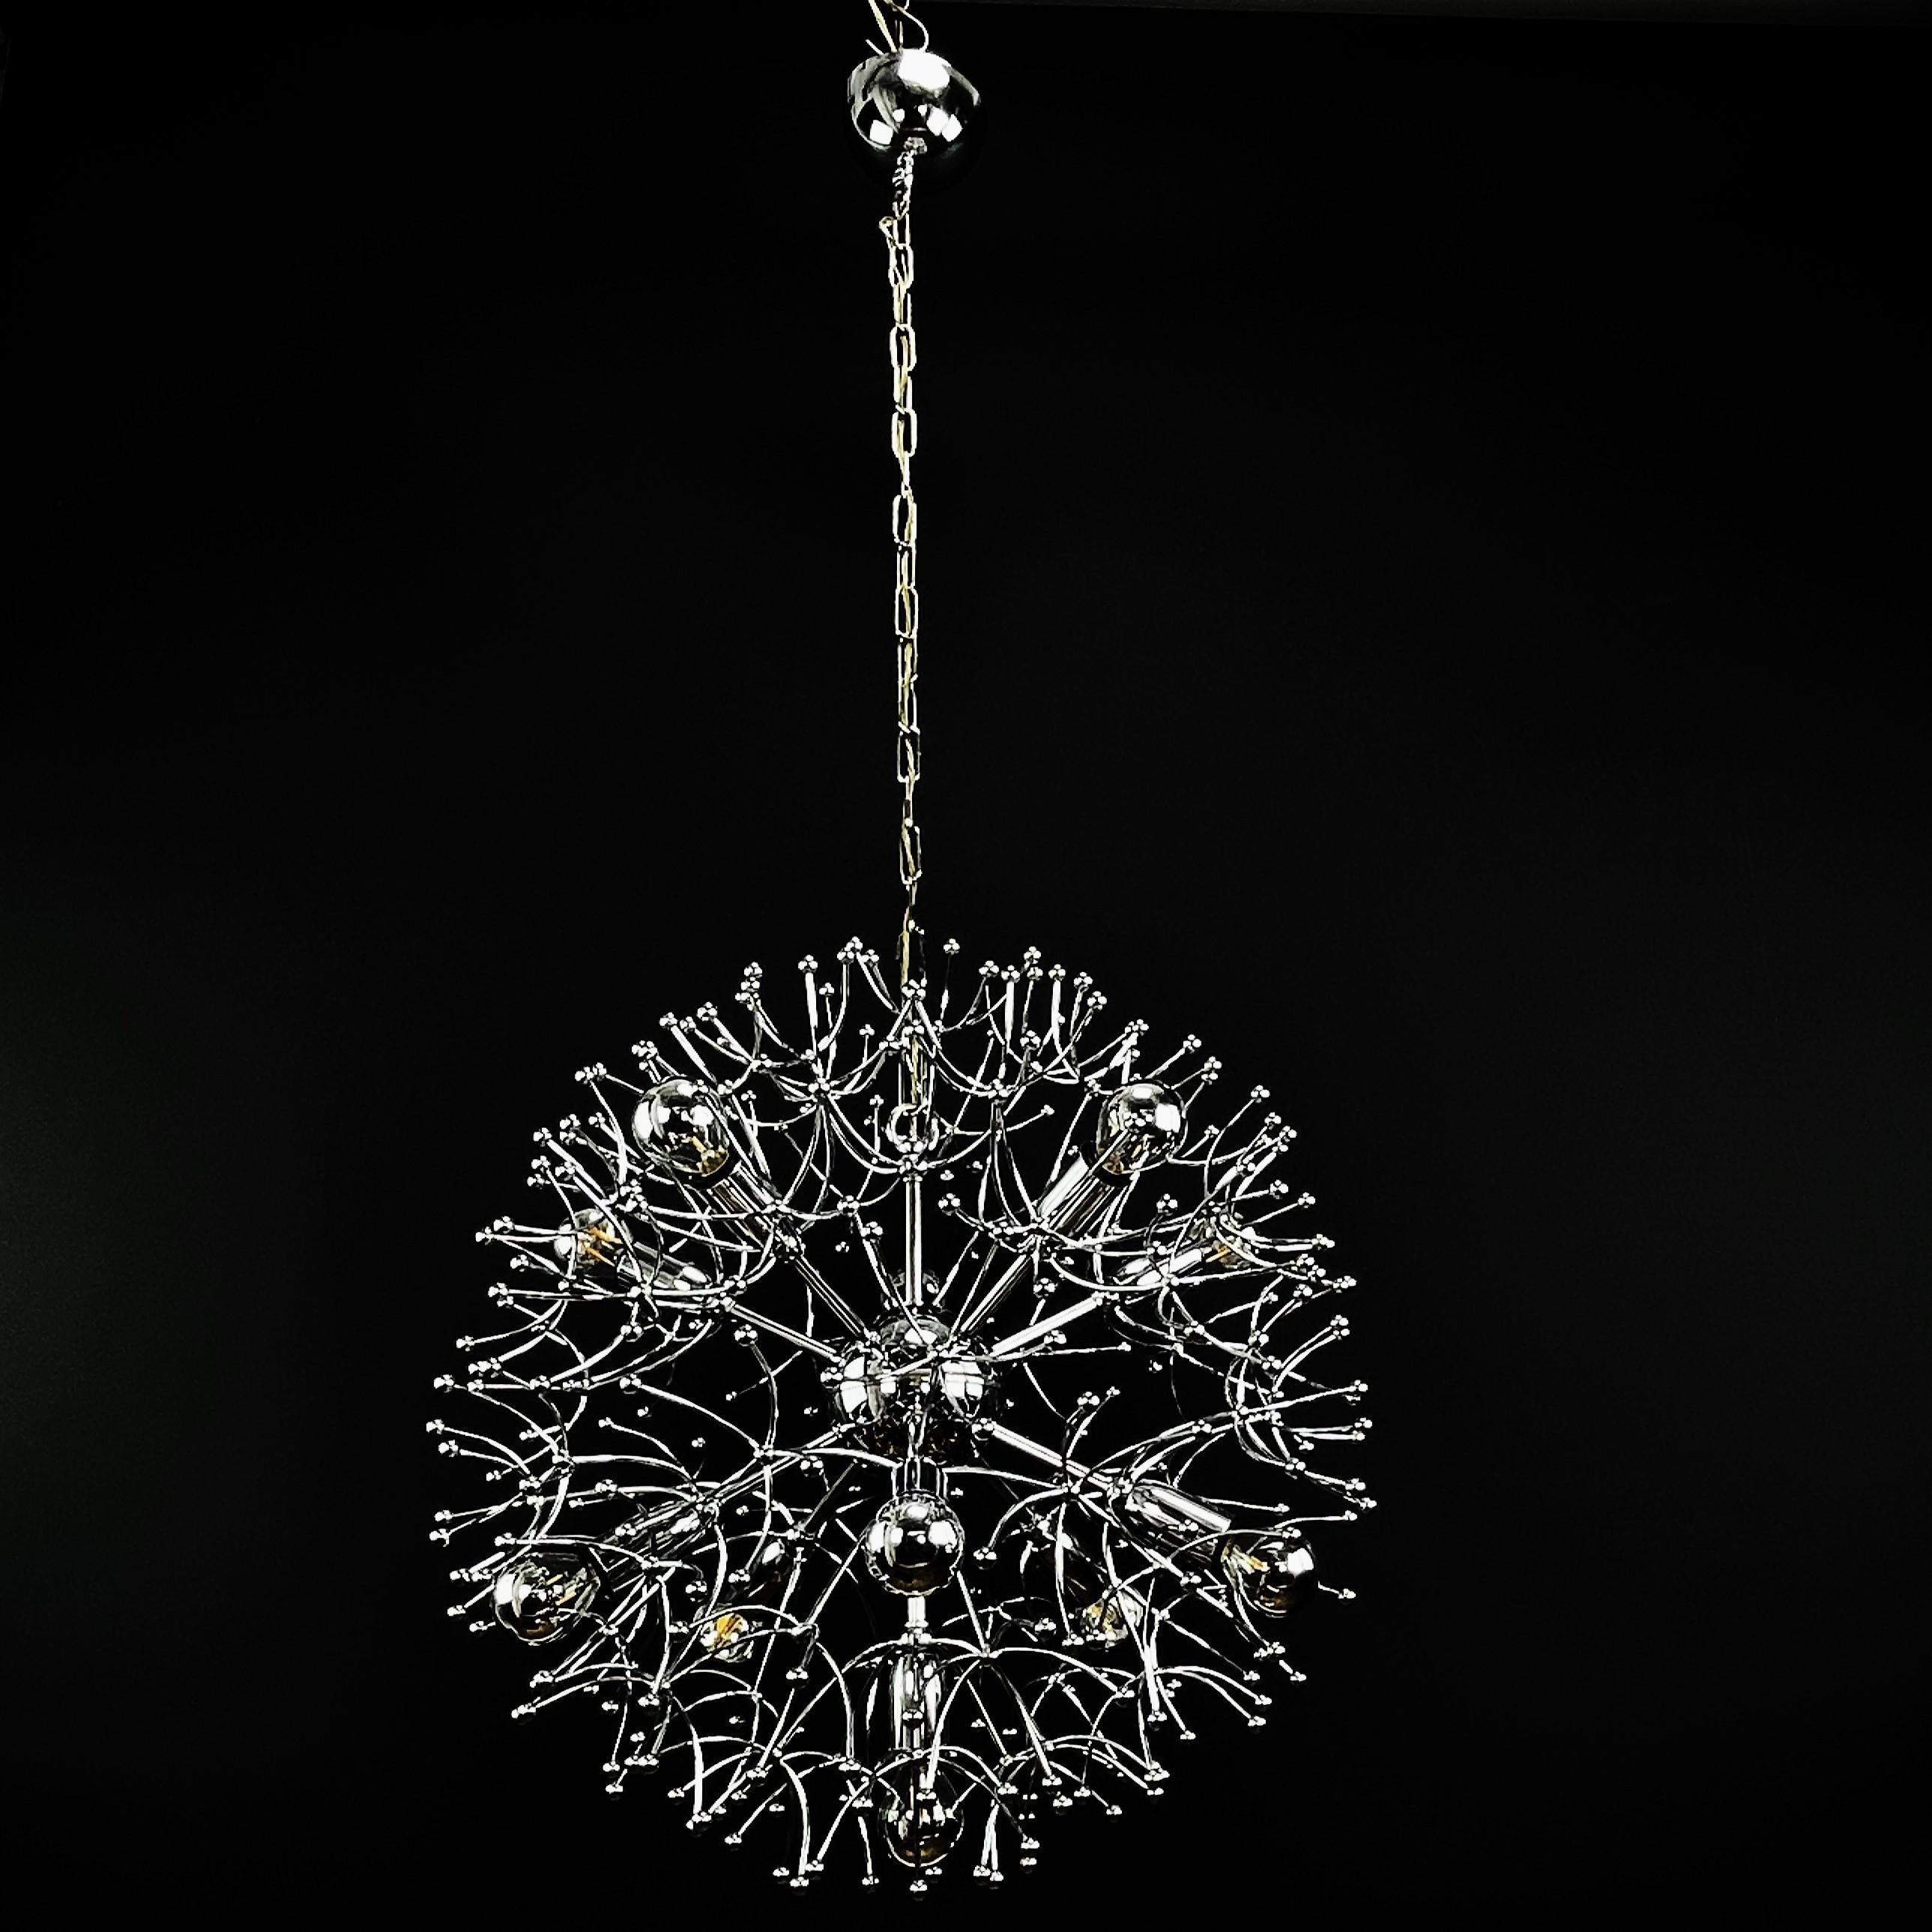 Sputnik ceiling lamp by Sciolary - 1970s.

The striking design of this ceiling lamp consists of delicate chrome leaves that radiate from the central core. The arrangement is reminiscent of the feathery seeds of a dandelion blowing in the wind. The